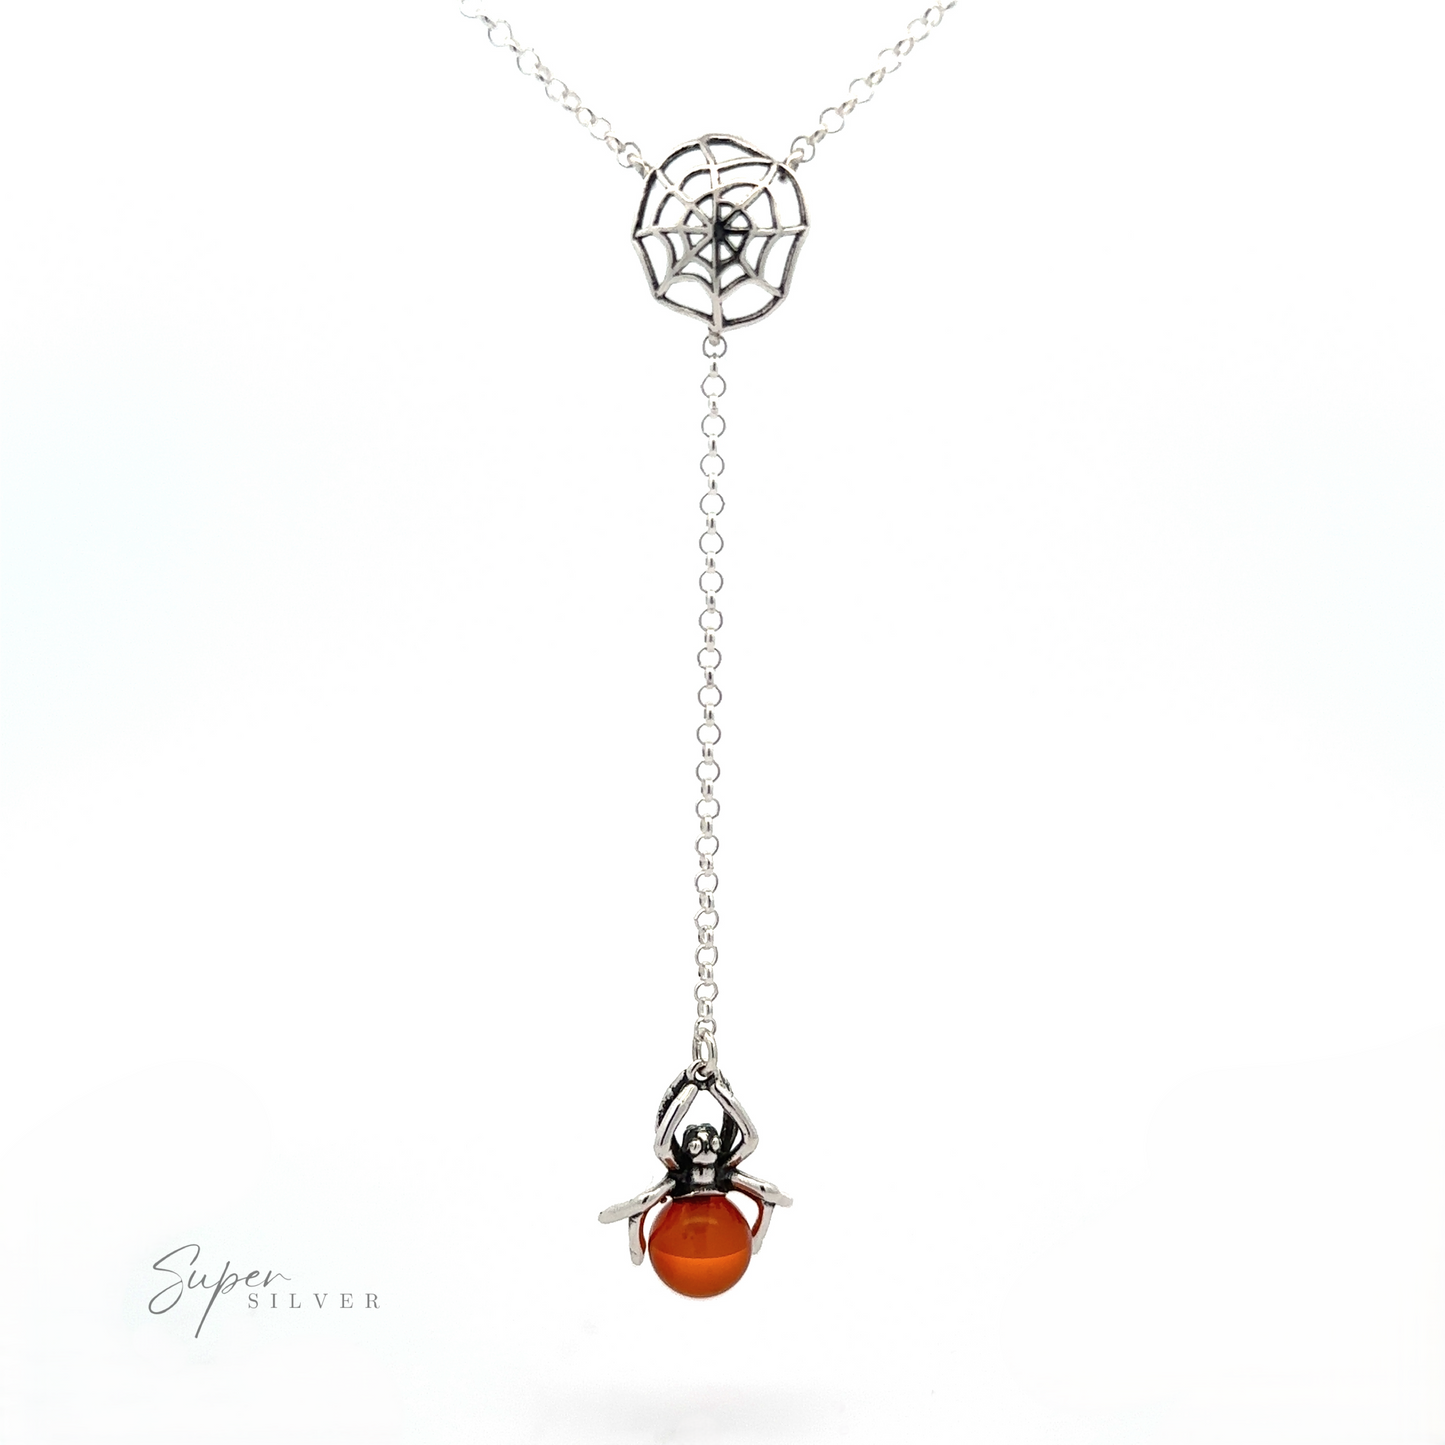 
                  
                    A Baltic Amber Spider Necklace with a spider and web pendant design, exuding a witchy vibe. The spider, suspended from the web by a chain, features a Baltic amber gemstone as its body. "Super Silver" is written in the bottom left corner.
                  
                